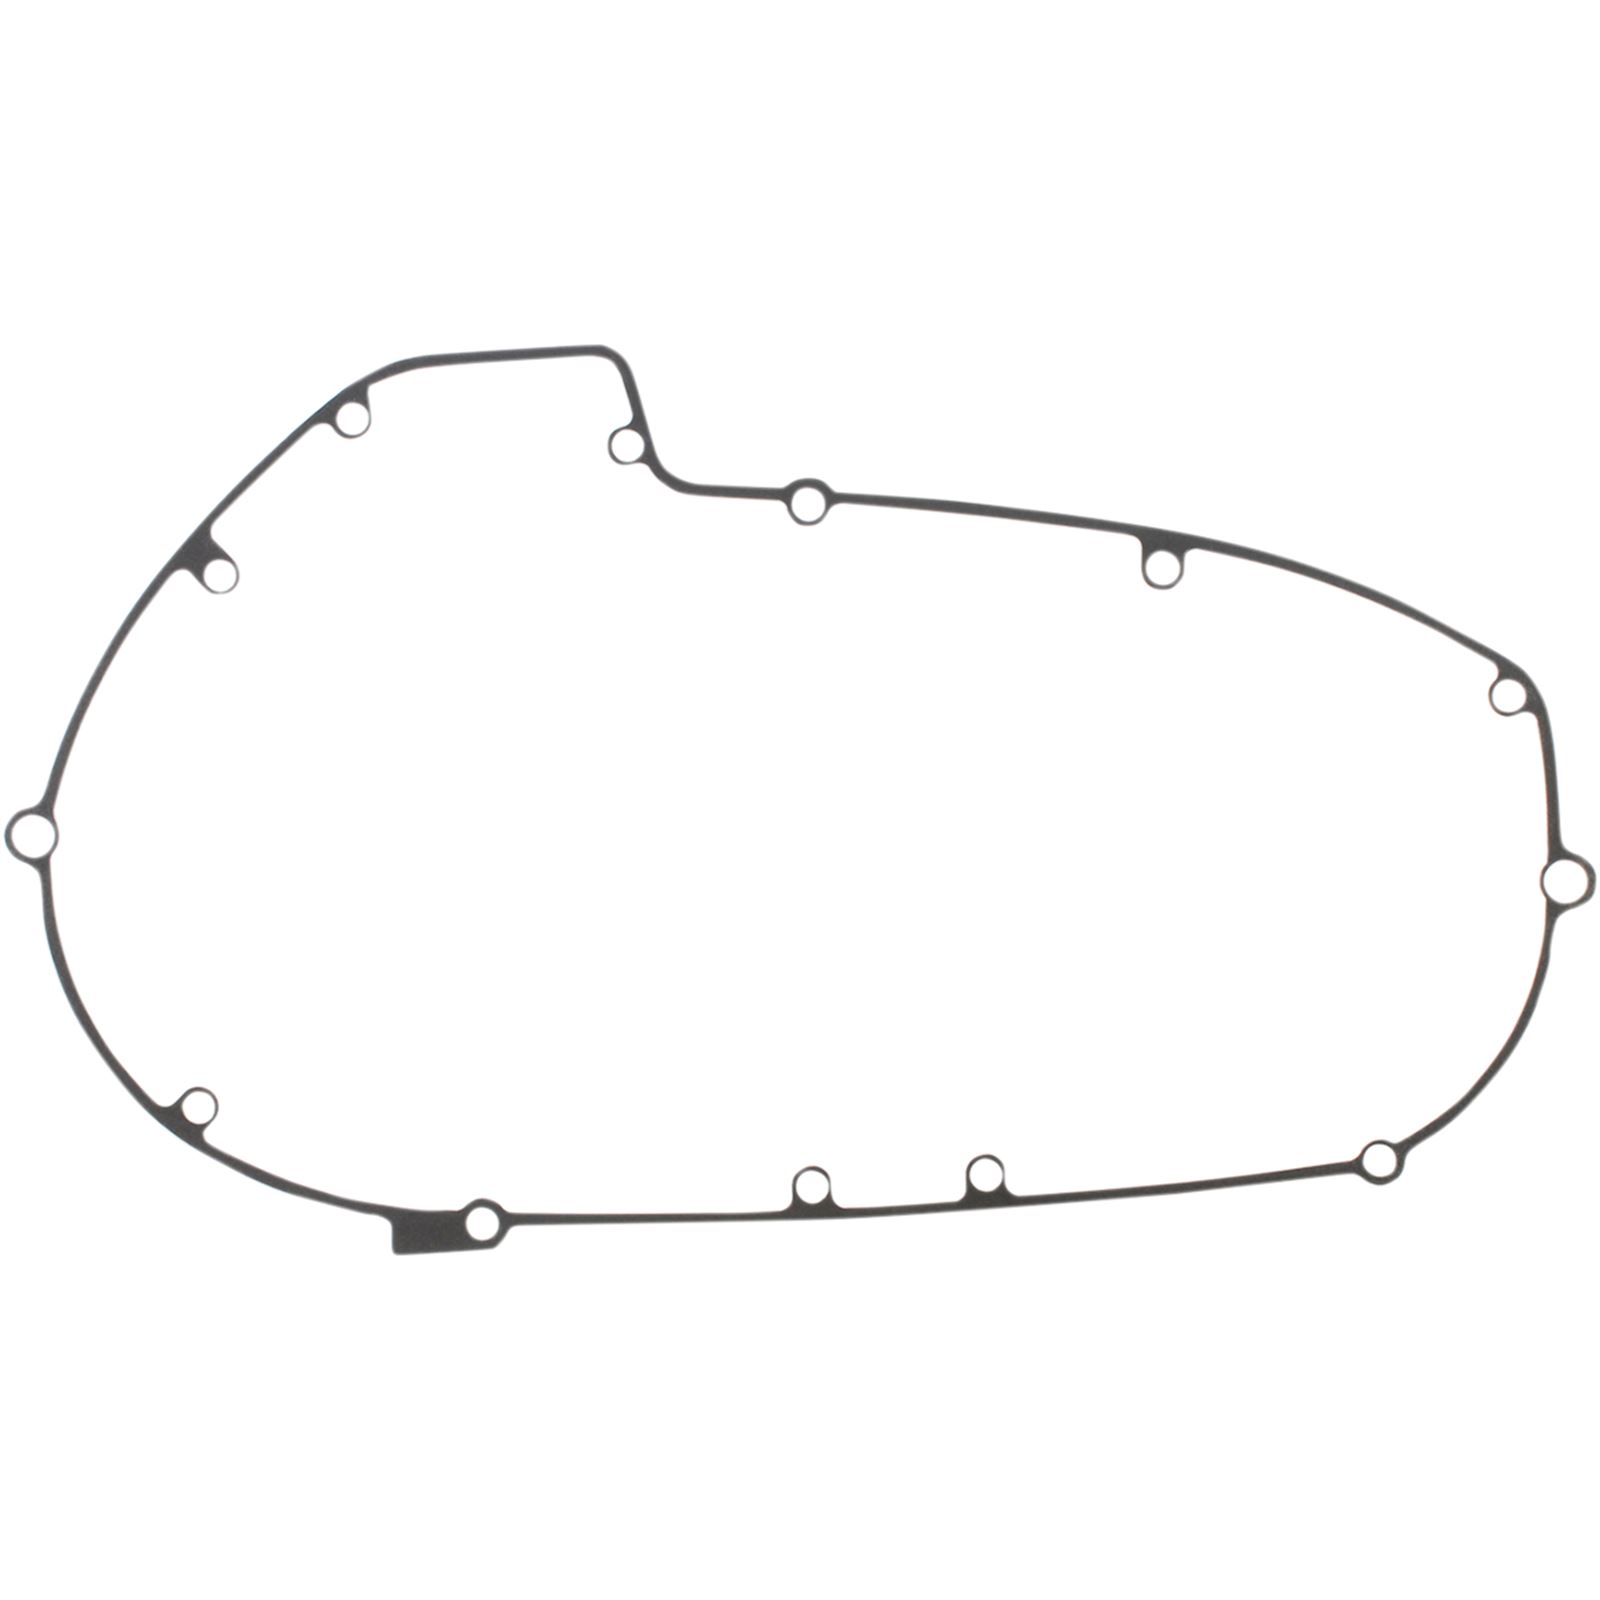 Cometic Primary Gasket - 25378-02